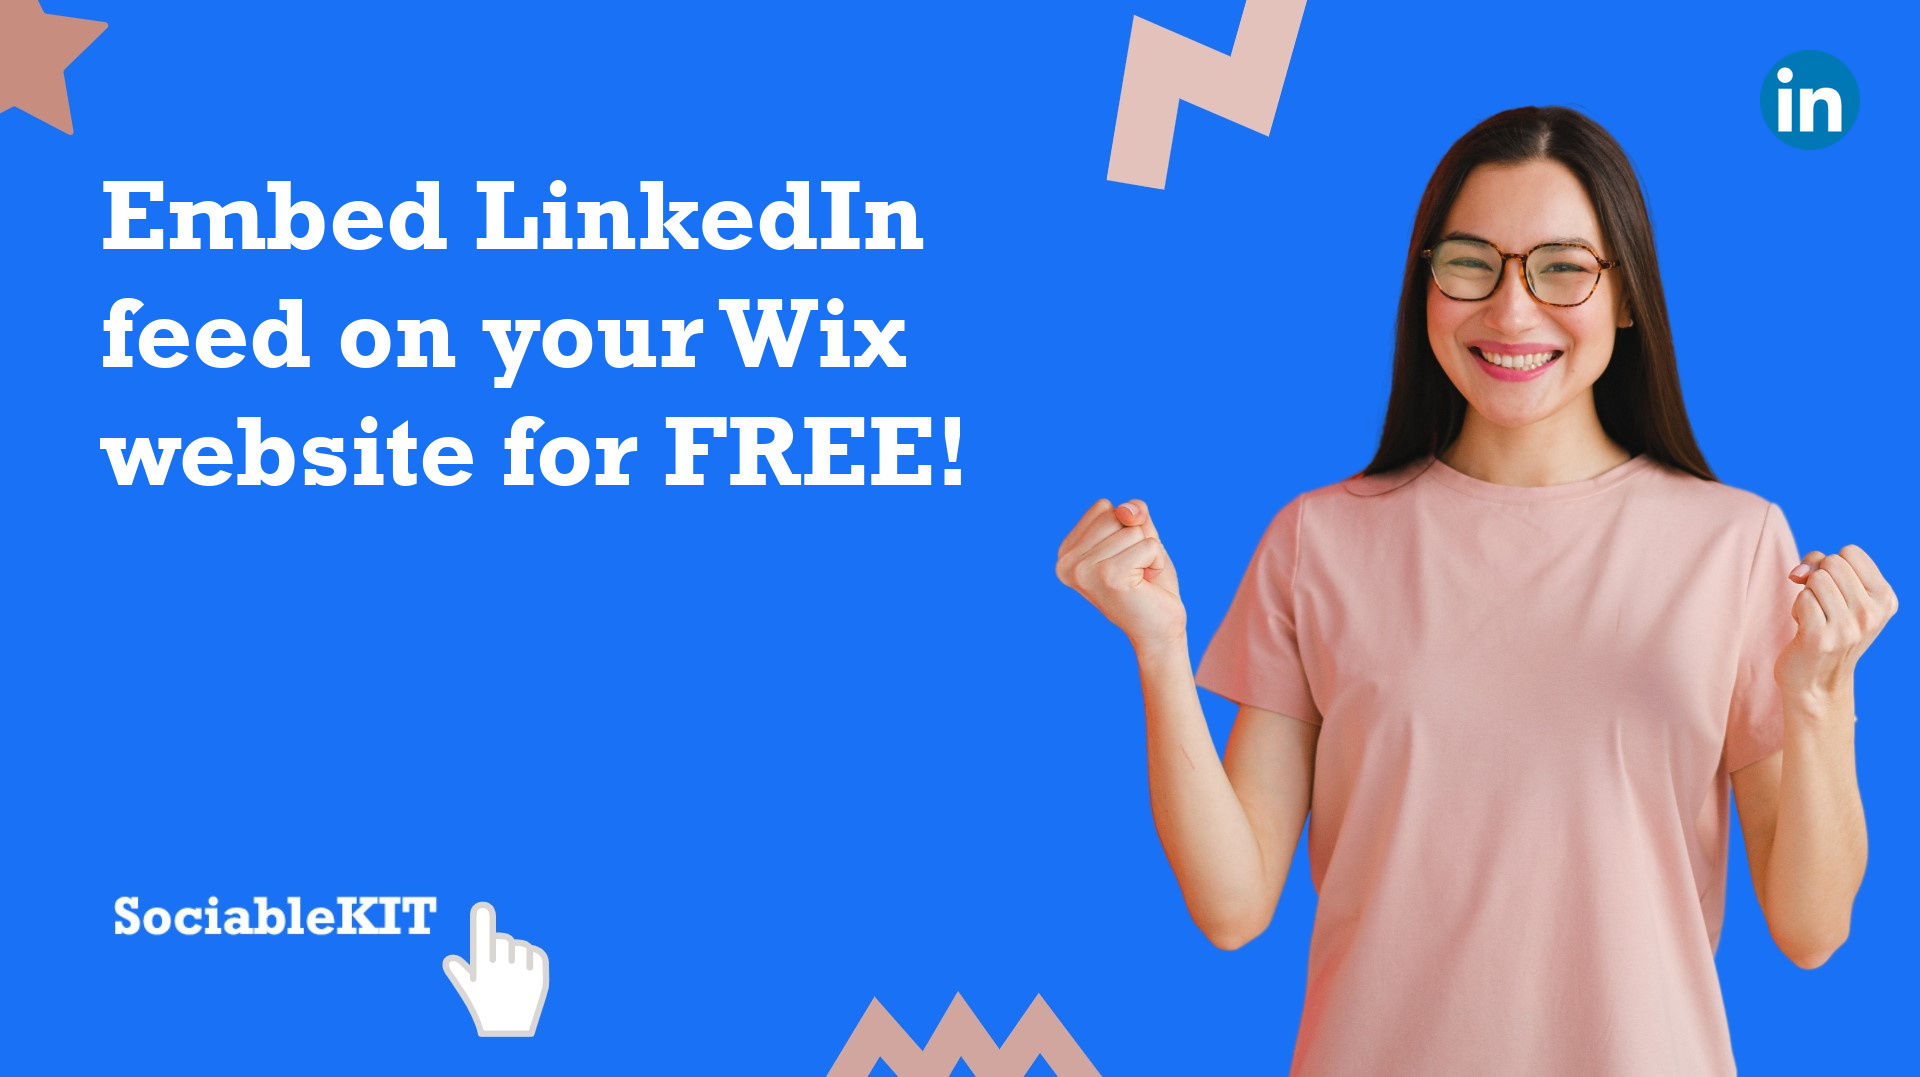 How to embed LinkedIn feed on your Wix website for FREE?